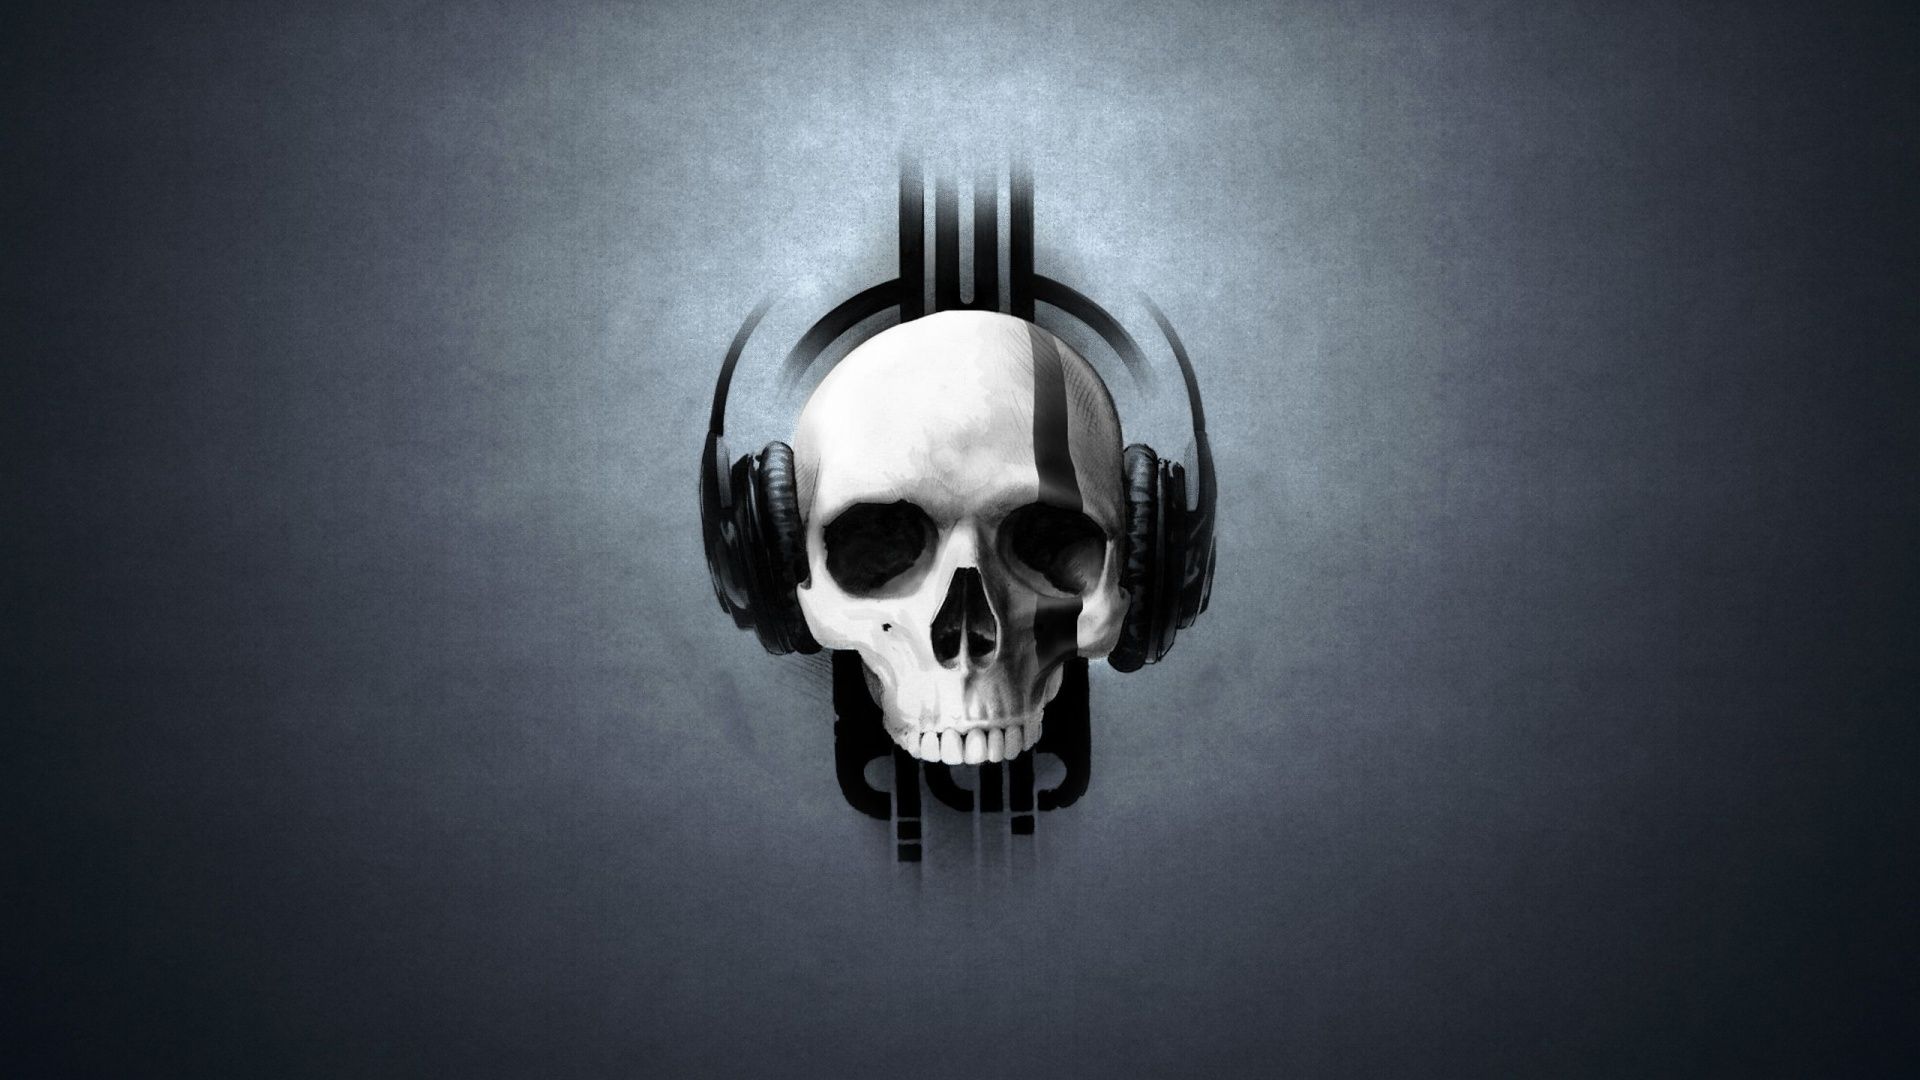 Cool Skull Wallpaper | Wallpapers, Backgrounds, Images, Art Photos.